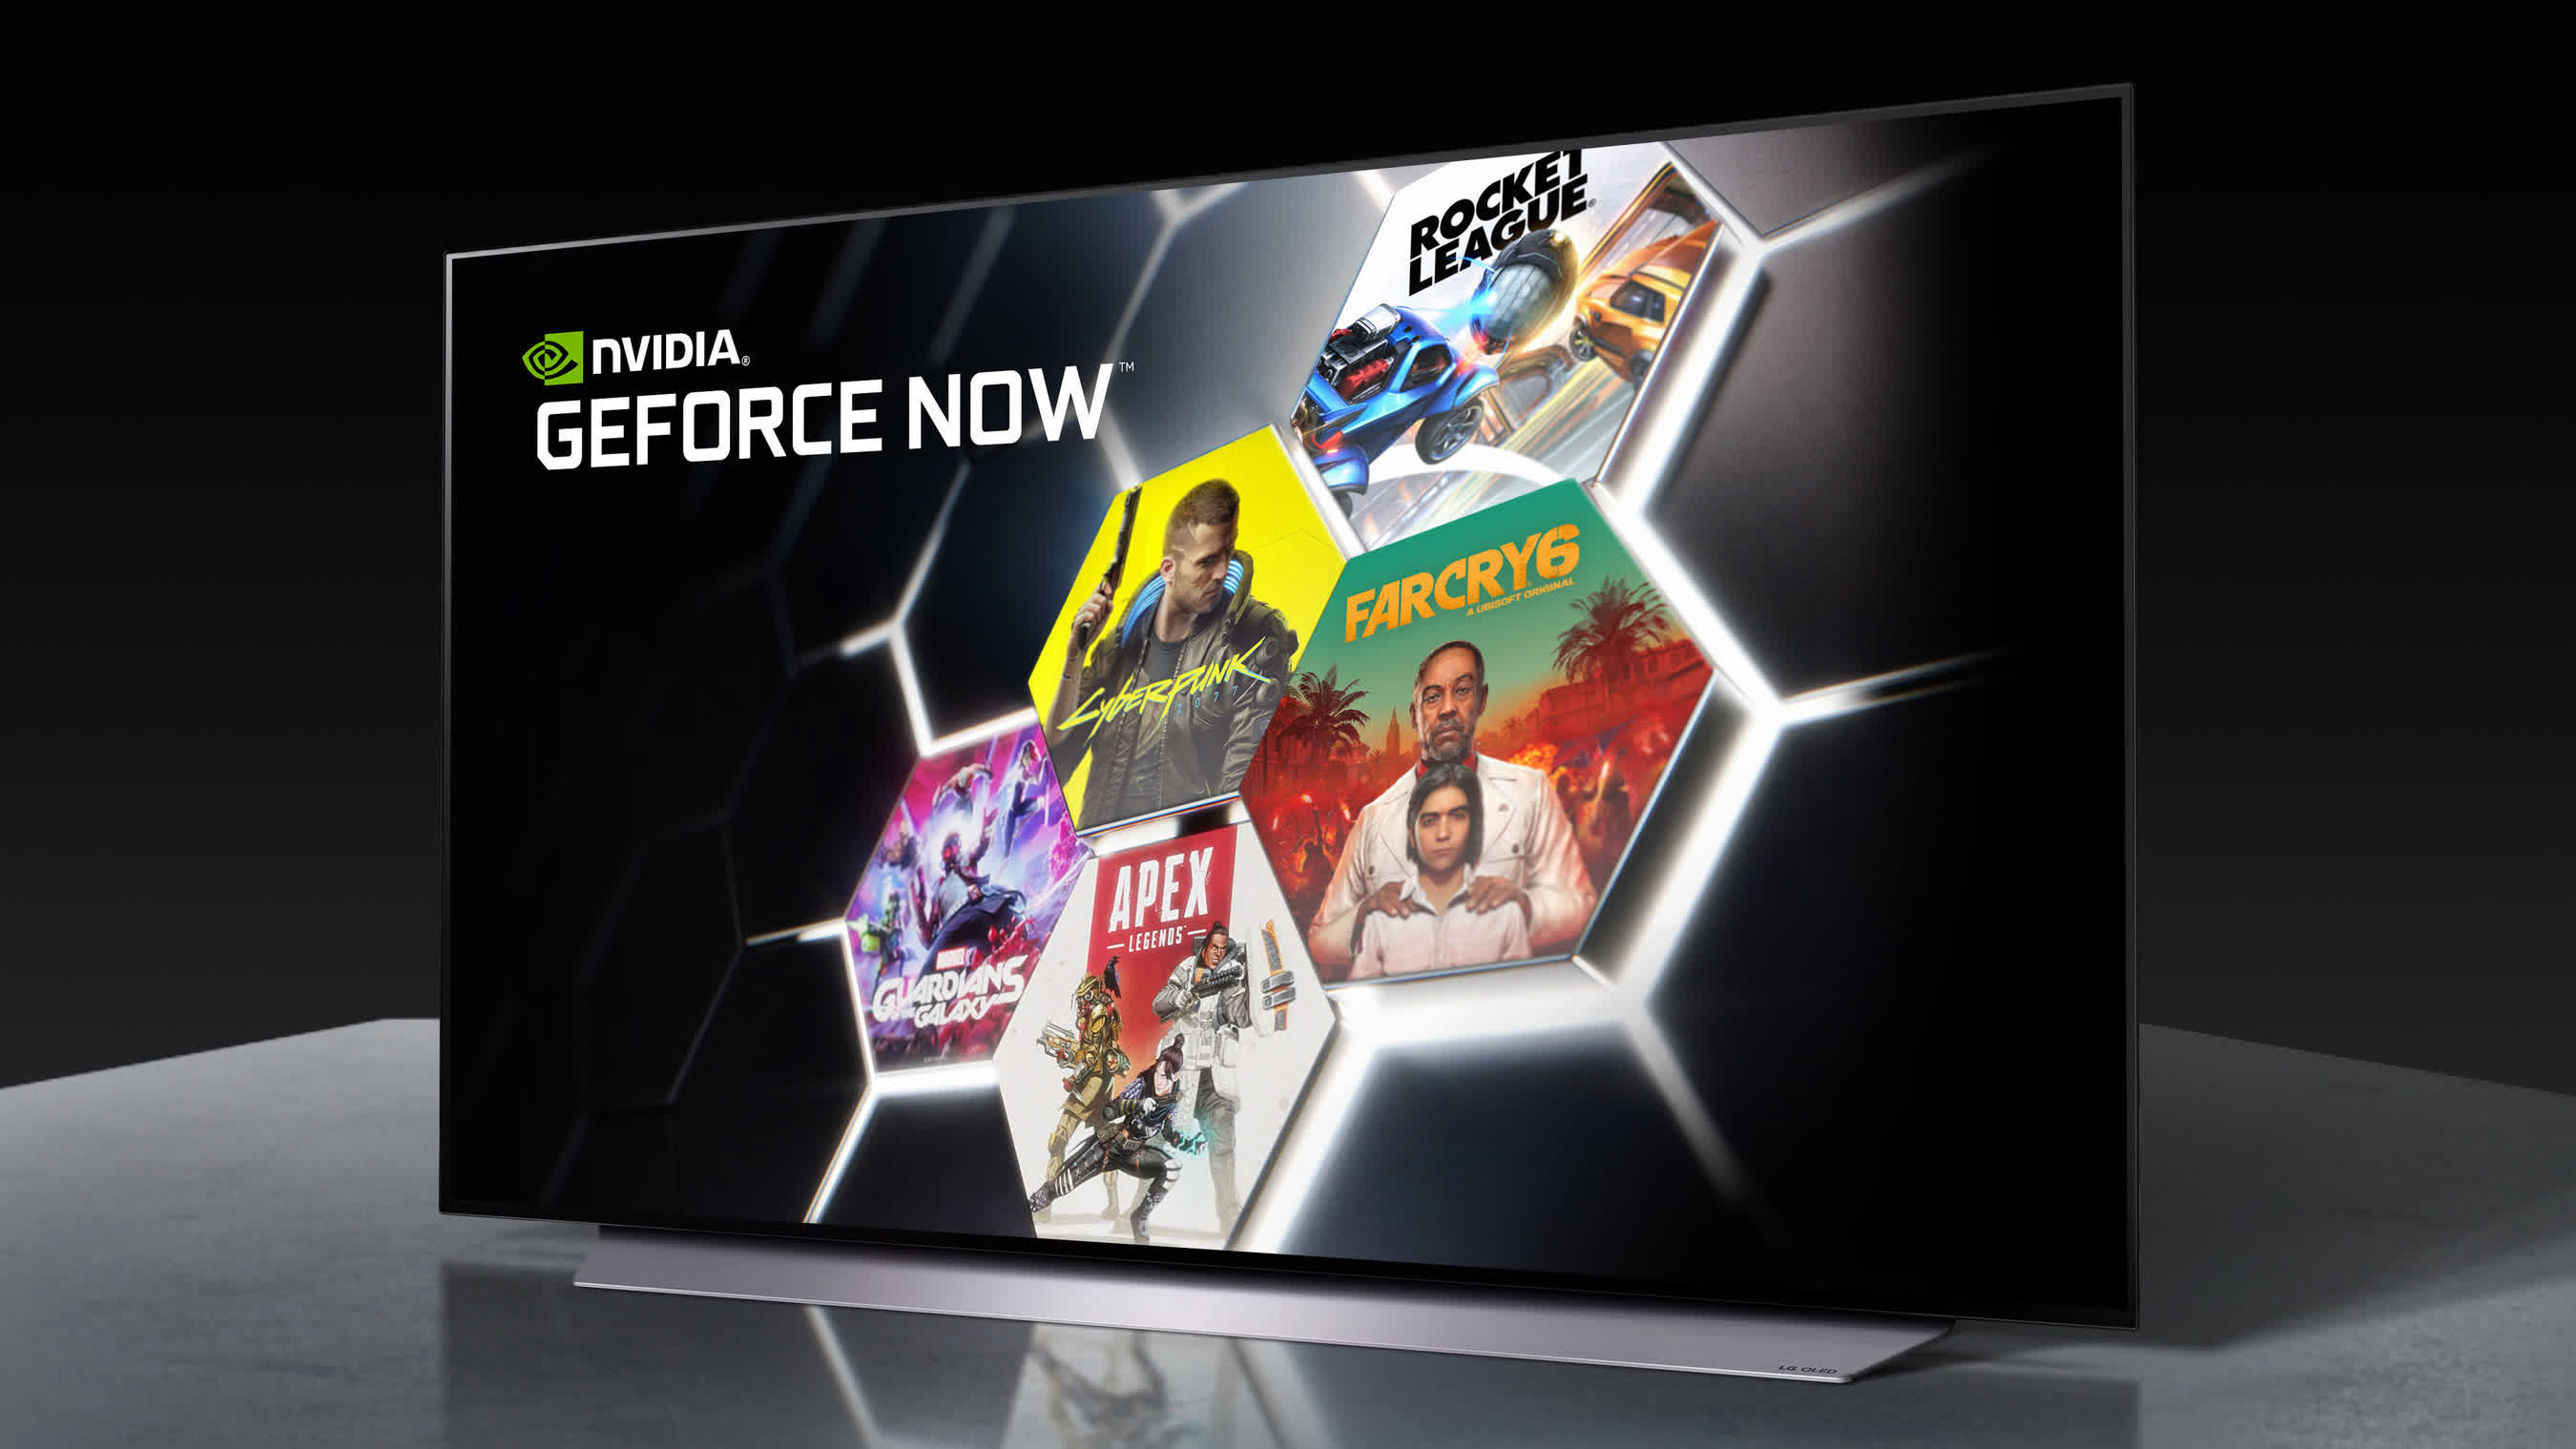 New LG 4K Smart TVs get 6 free months of GeForce Now with their purchase